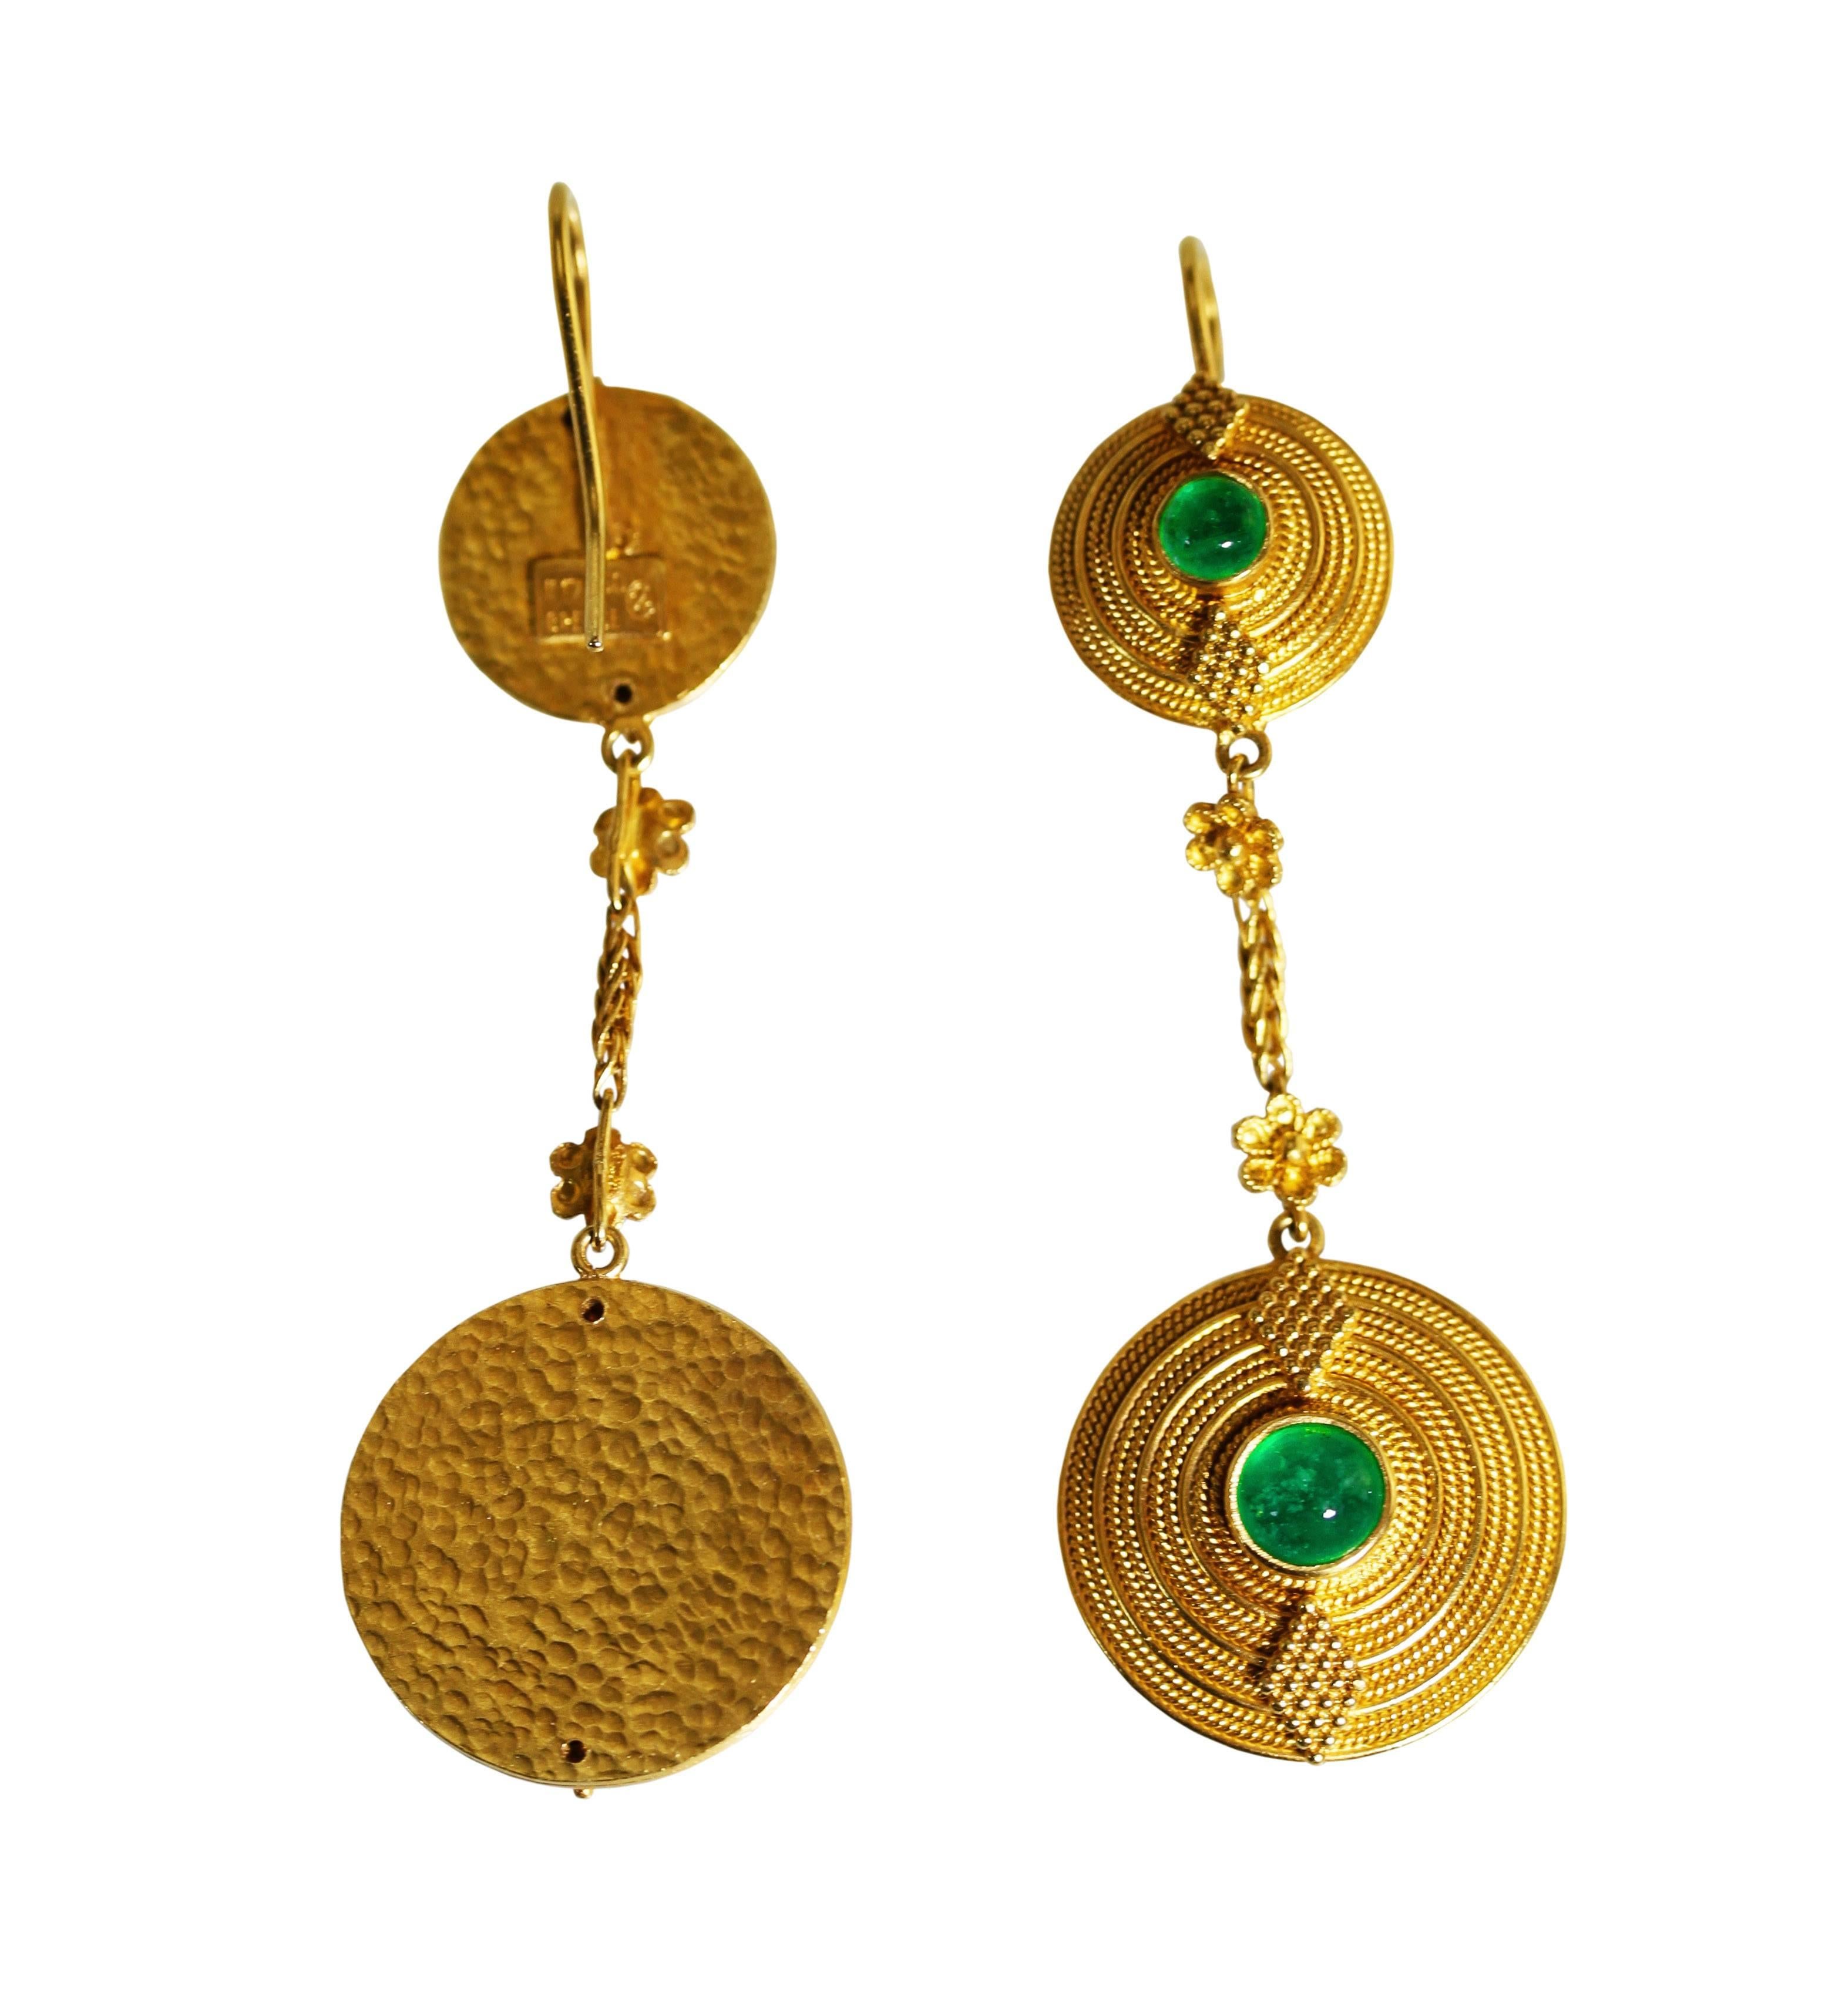 A pair 18 karat gold and emerald pendant-earrings by Lalaounis, Greece, designed as circular domed pendants suspended from links surmounted by smaller circular domes of similar style, set throughout with 4 cabochon emeralds weighing approximately